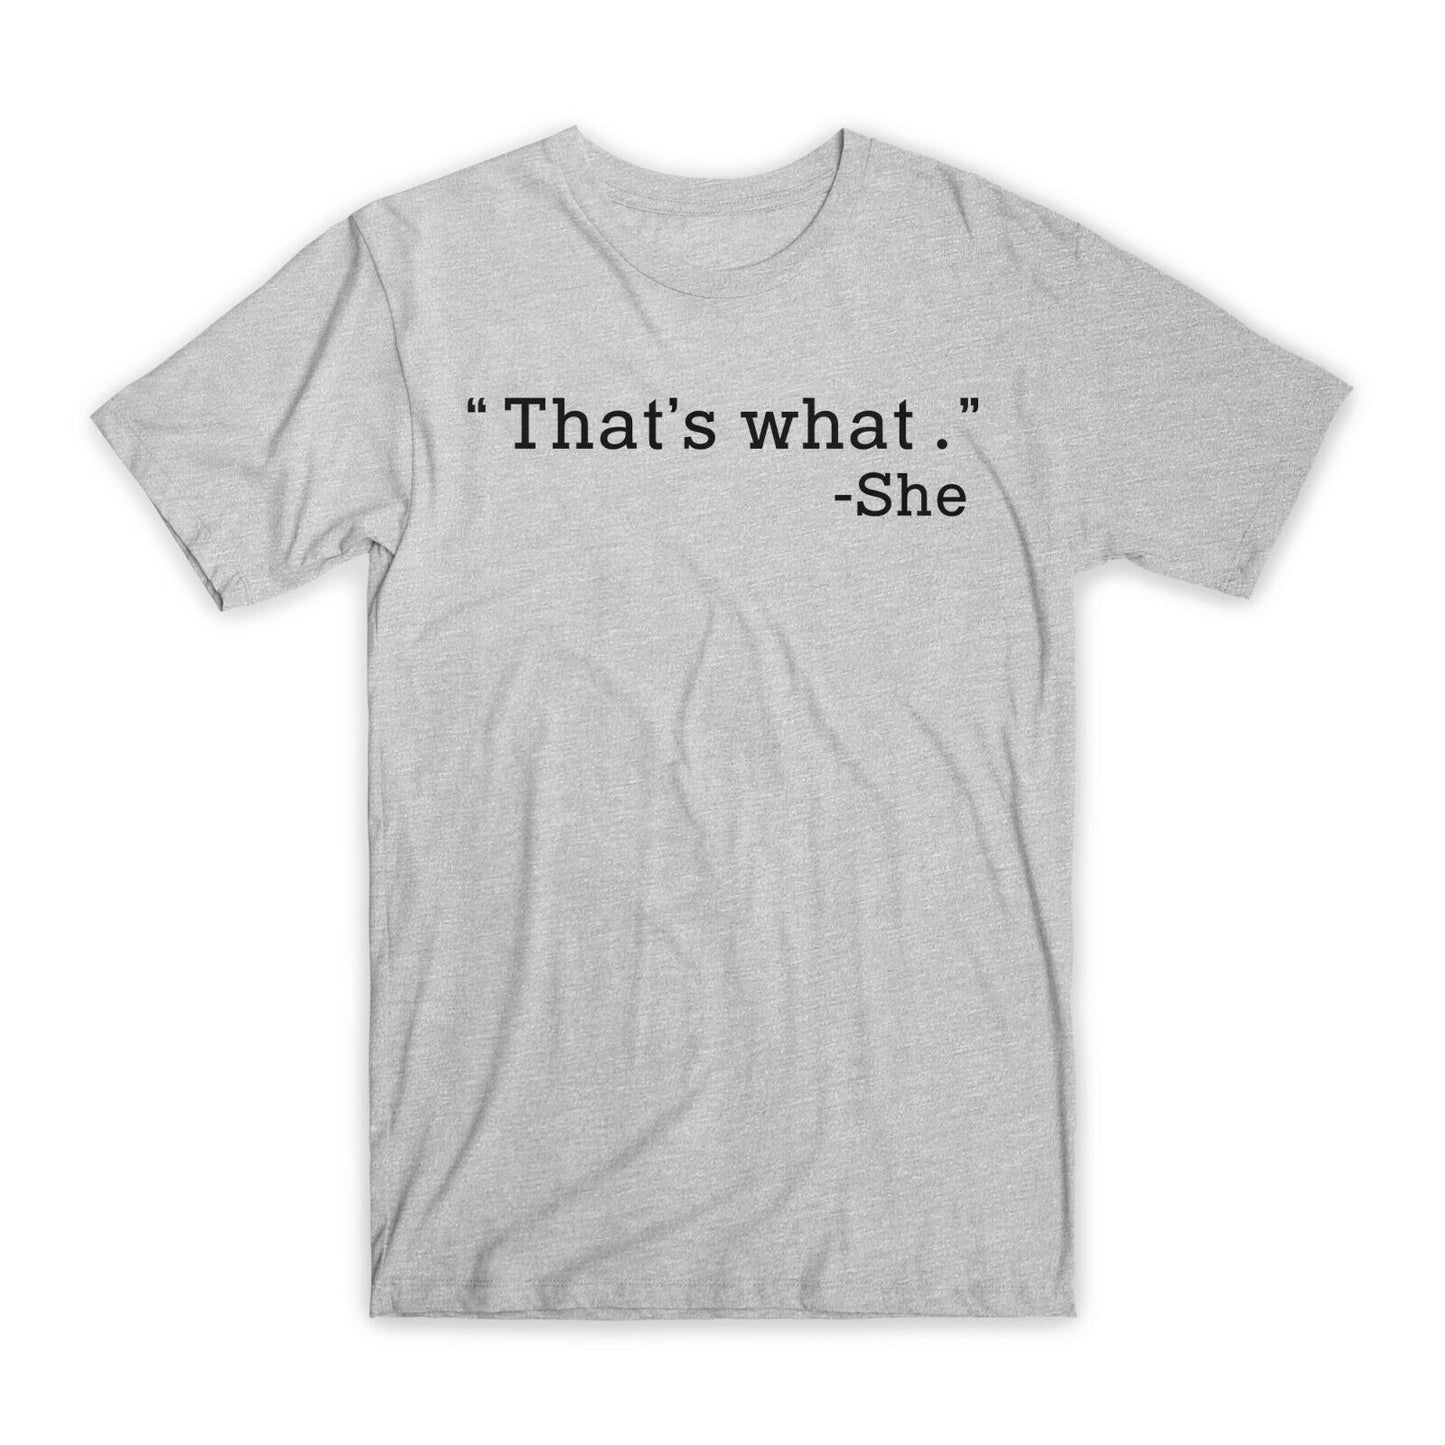 That's What She T-Shirt Premium Soft Cotton Crew Neck Funny Tee Novelty Gift NEW